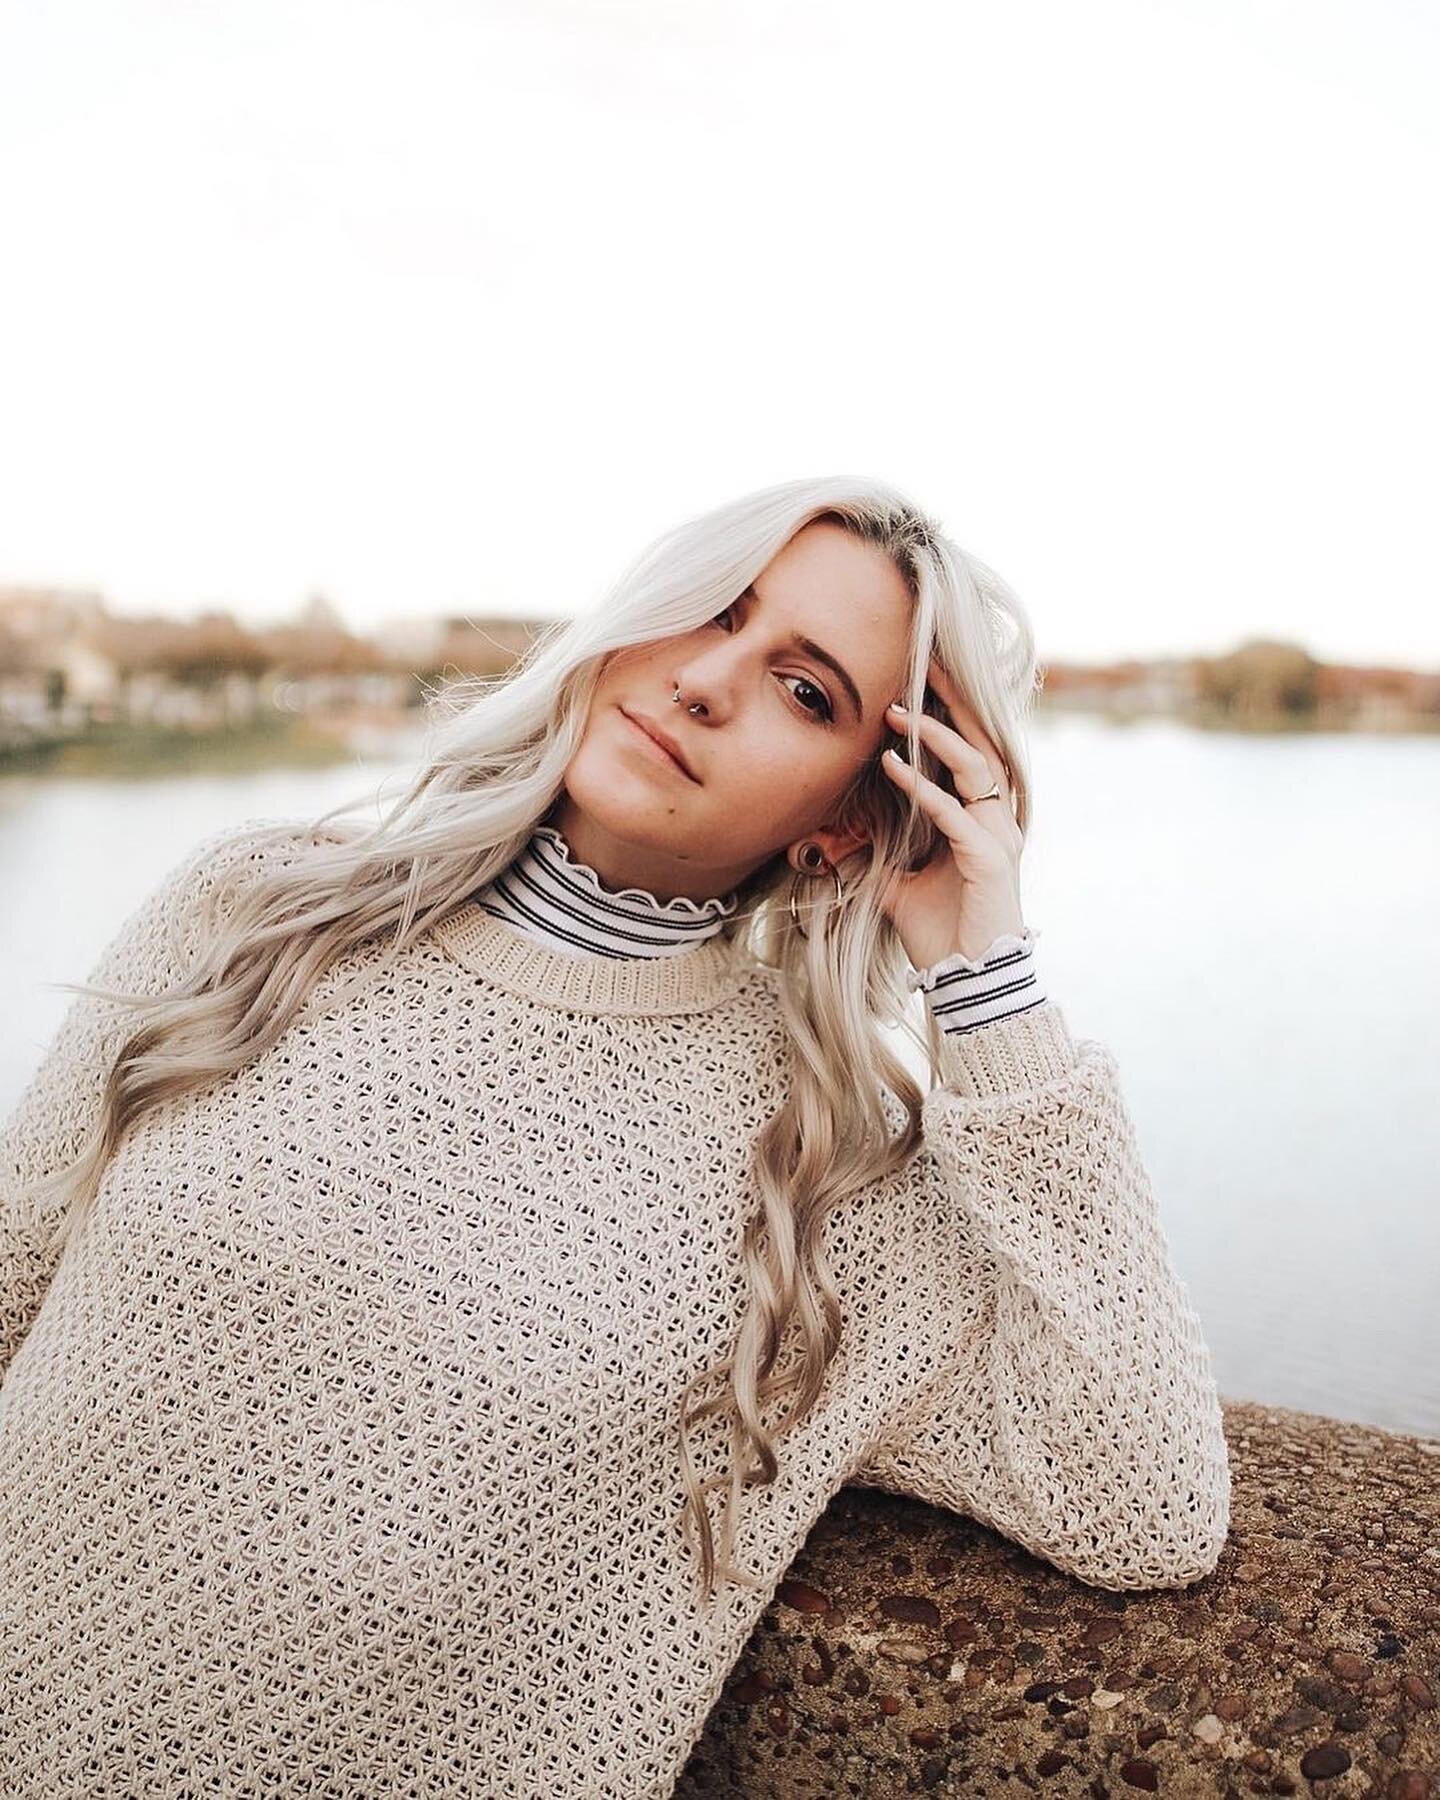 20% OFF ALL PRESET PACKS TODAY ONLY 🥳 Kicking off the sale with @alyssabwillett who used Morning Mist from the mobile preset pack she snagged today. Wow THESE TONES 😍🤤😩 Swipe to see the &ldquo;before&rdquo; and shop the preset sale with the link 